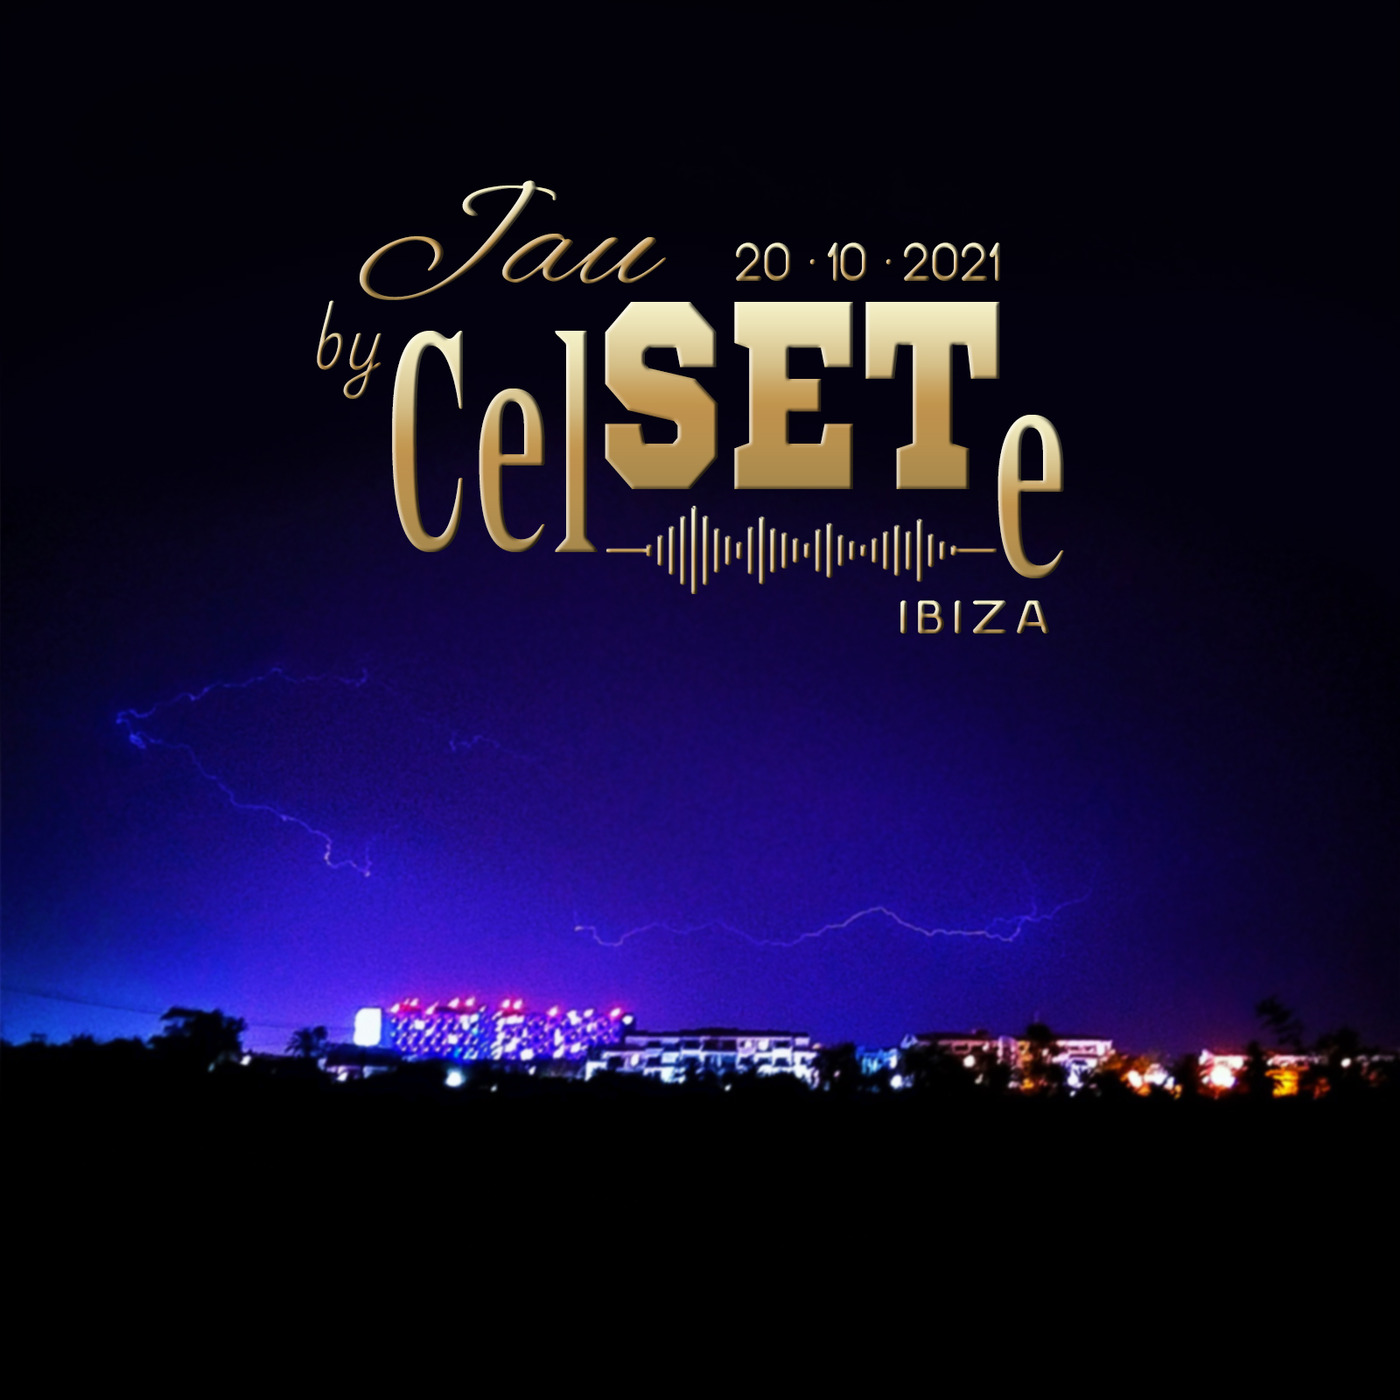 Celso Diaz - Set House Ibiza 20-10-2021  JauSETe by CELSETE